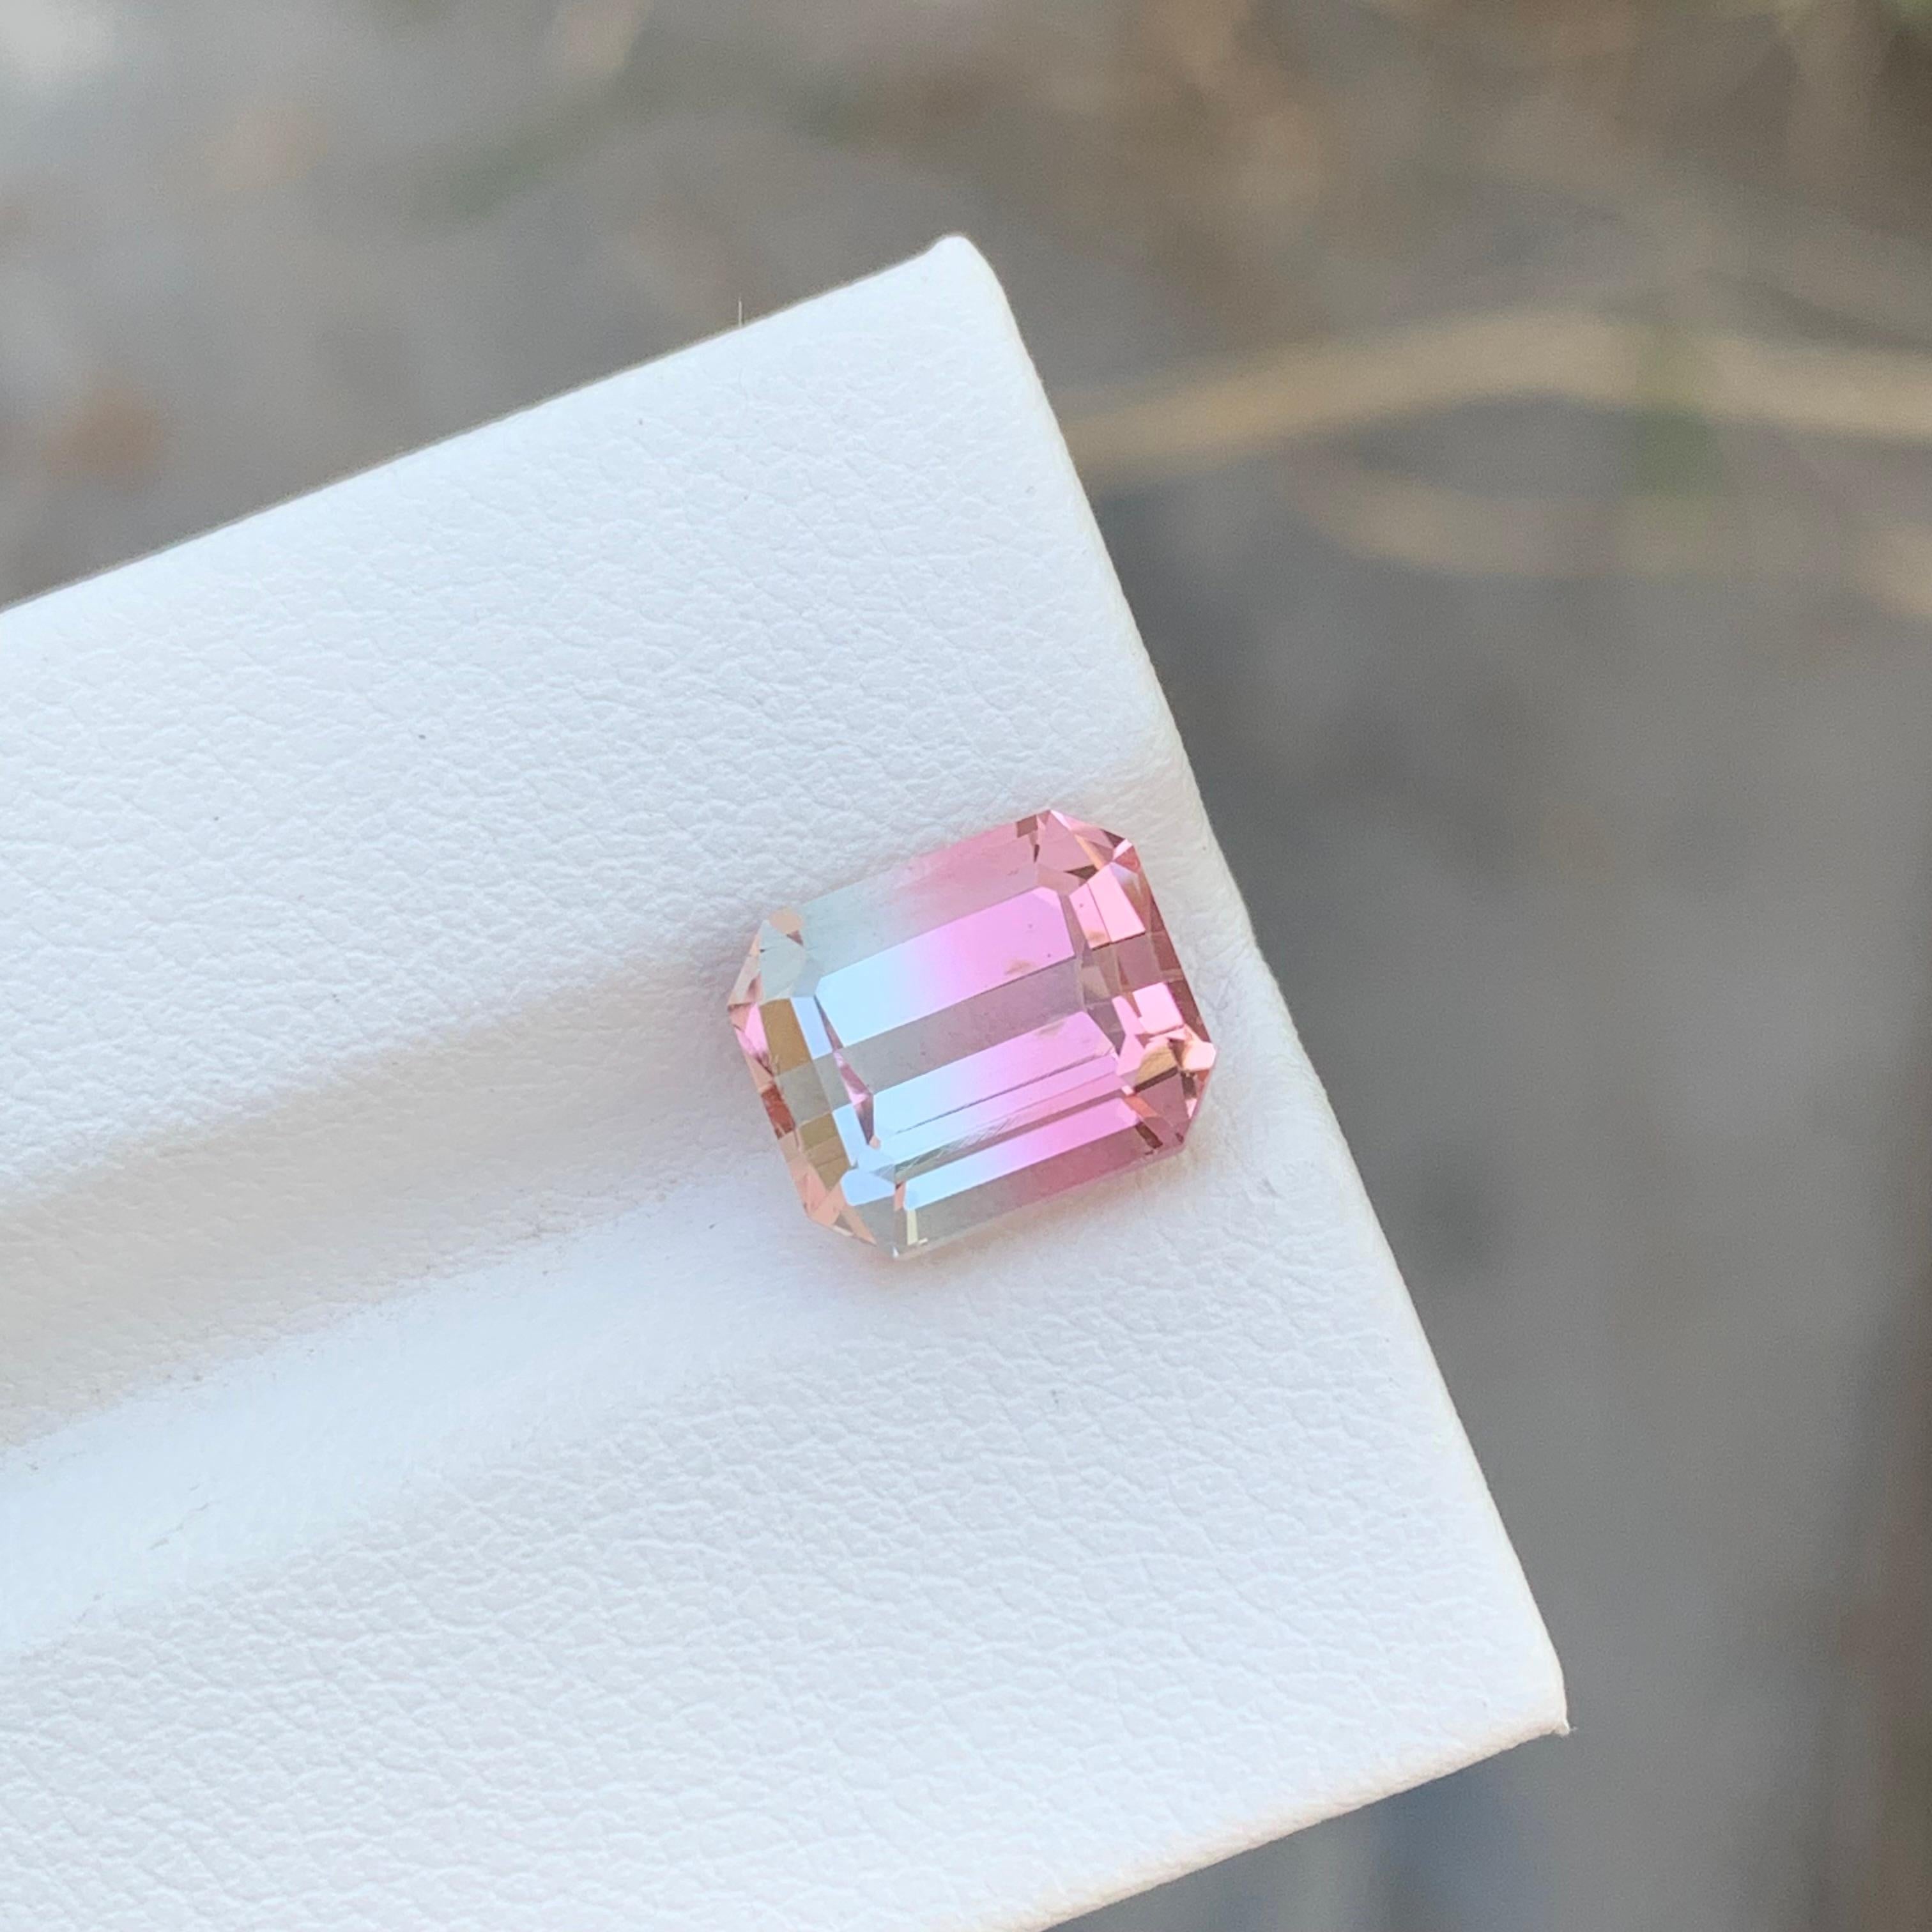 Bicolor Tourmaline 
Weight: 3.80 Carats 
Dimension: 9.2x7.8x6.5 Mm
Origin: Kunar Afghanistan 
Shape: Emerald 
Color: Pink & White
Treatment: Non 
Certificate: On Demand 
Baby pink bicolor tourmaline is a delightful gemstone that captivates with its